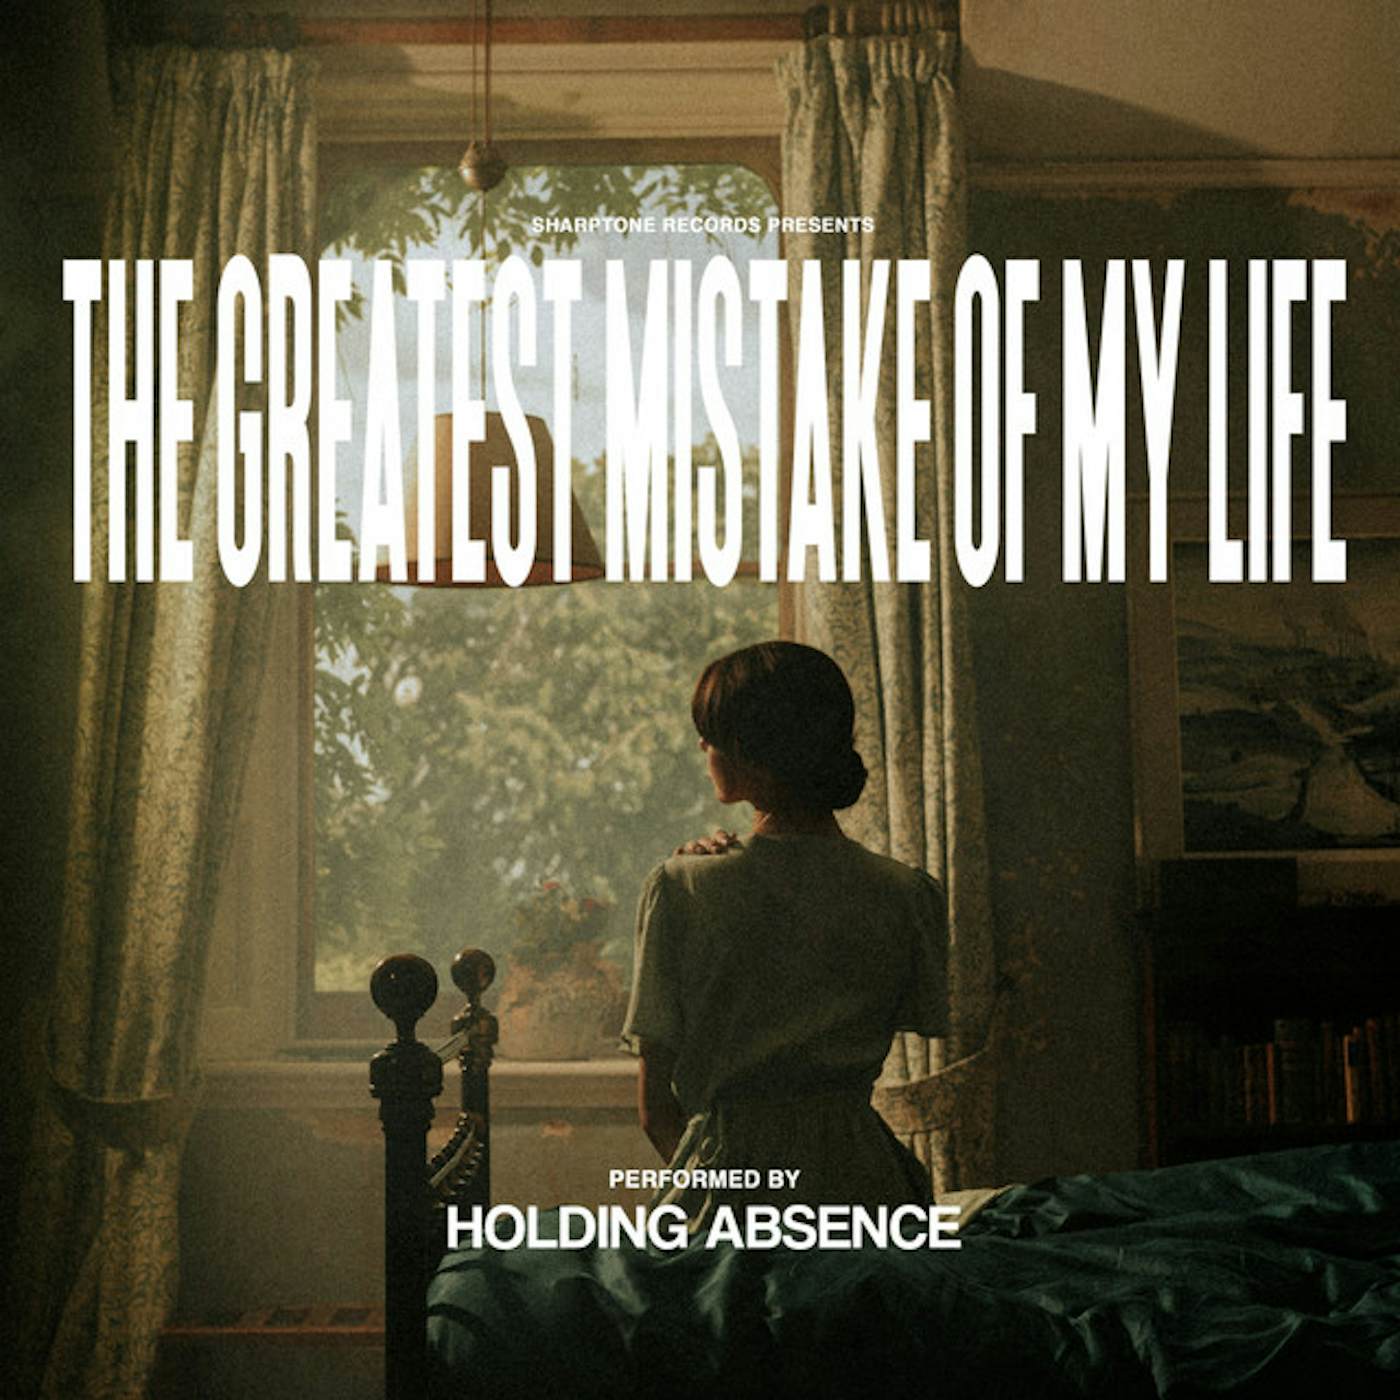 Holding Absence Greatest Mistake Of My Life Vinyl Record